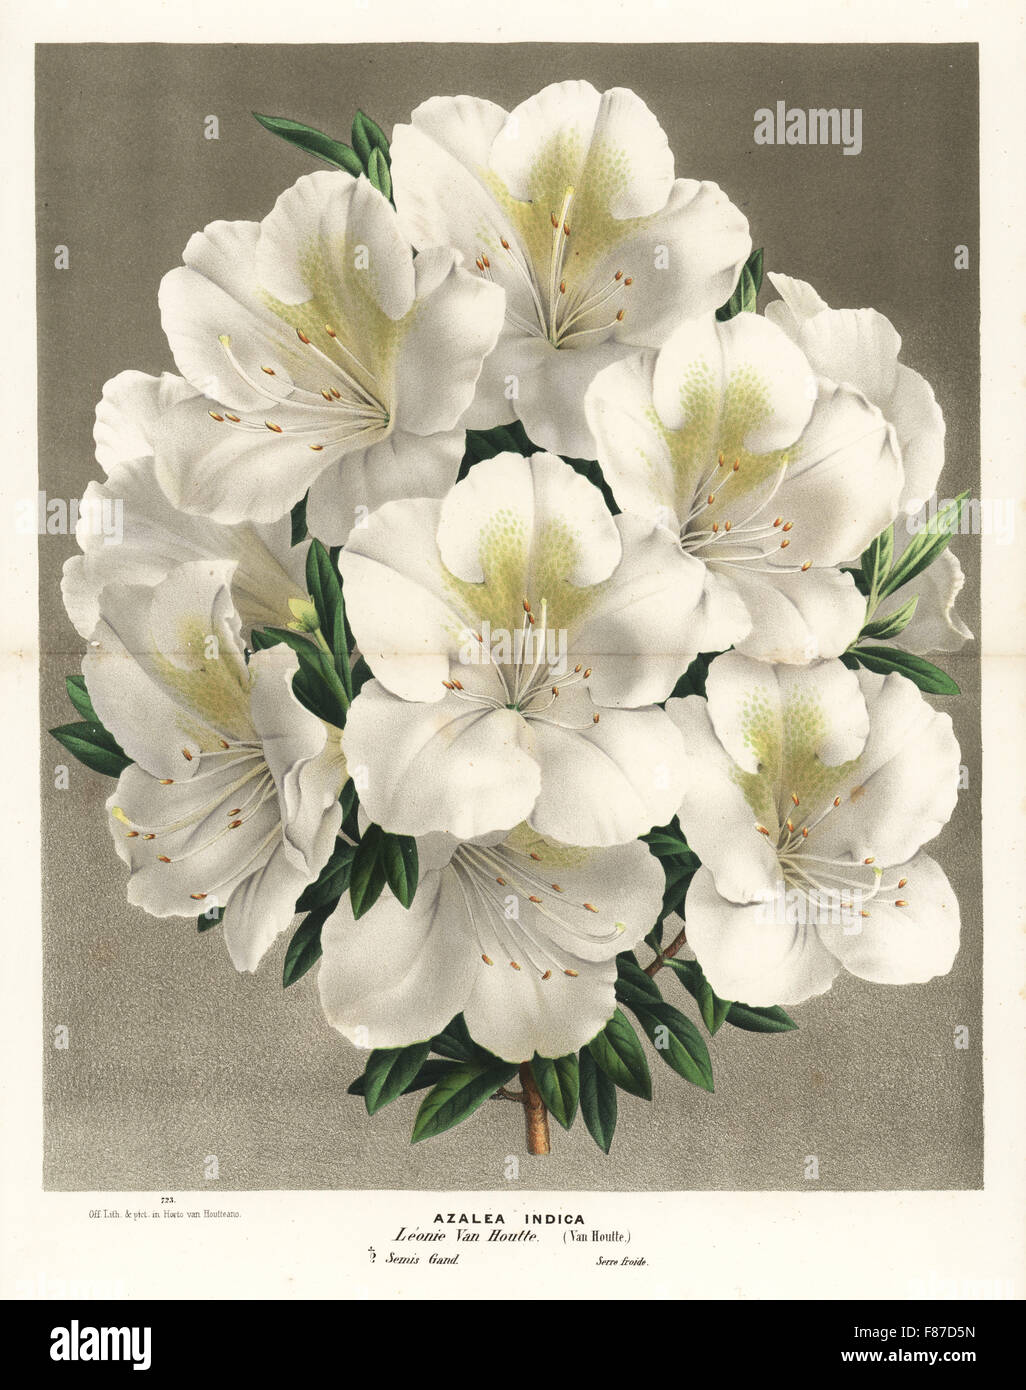 Azalea indica hybrid, Leonie van Houtte, Satsuki azalea, Rhododendron indicum. Handcoloured lithograph from Louis van Houtte and Charles Lemaire's Flowers of the Gardens and Hothouses of Europe, Flore des Serres et des Jardins de l'Europe, Ghent, Belgium, 1870. Stock Photo